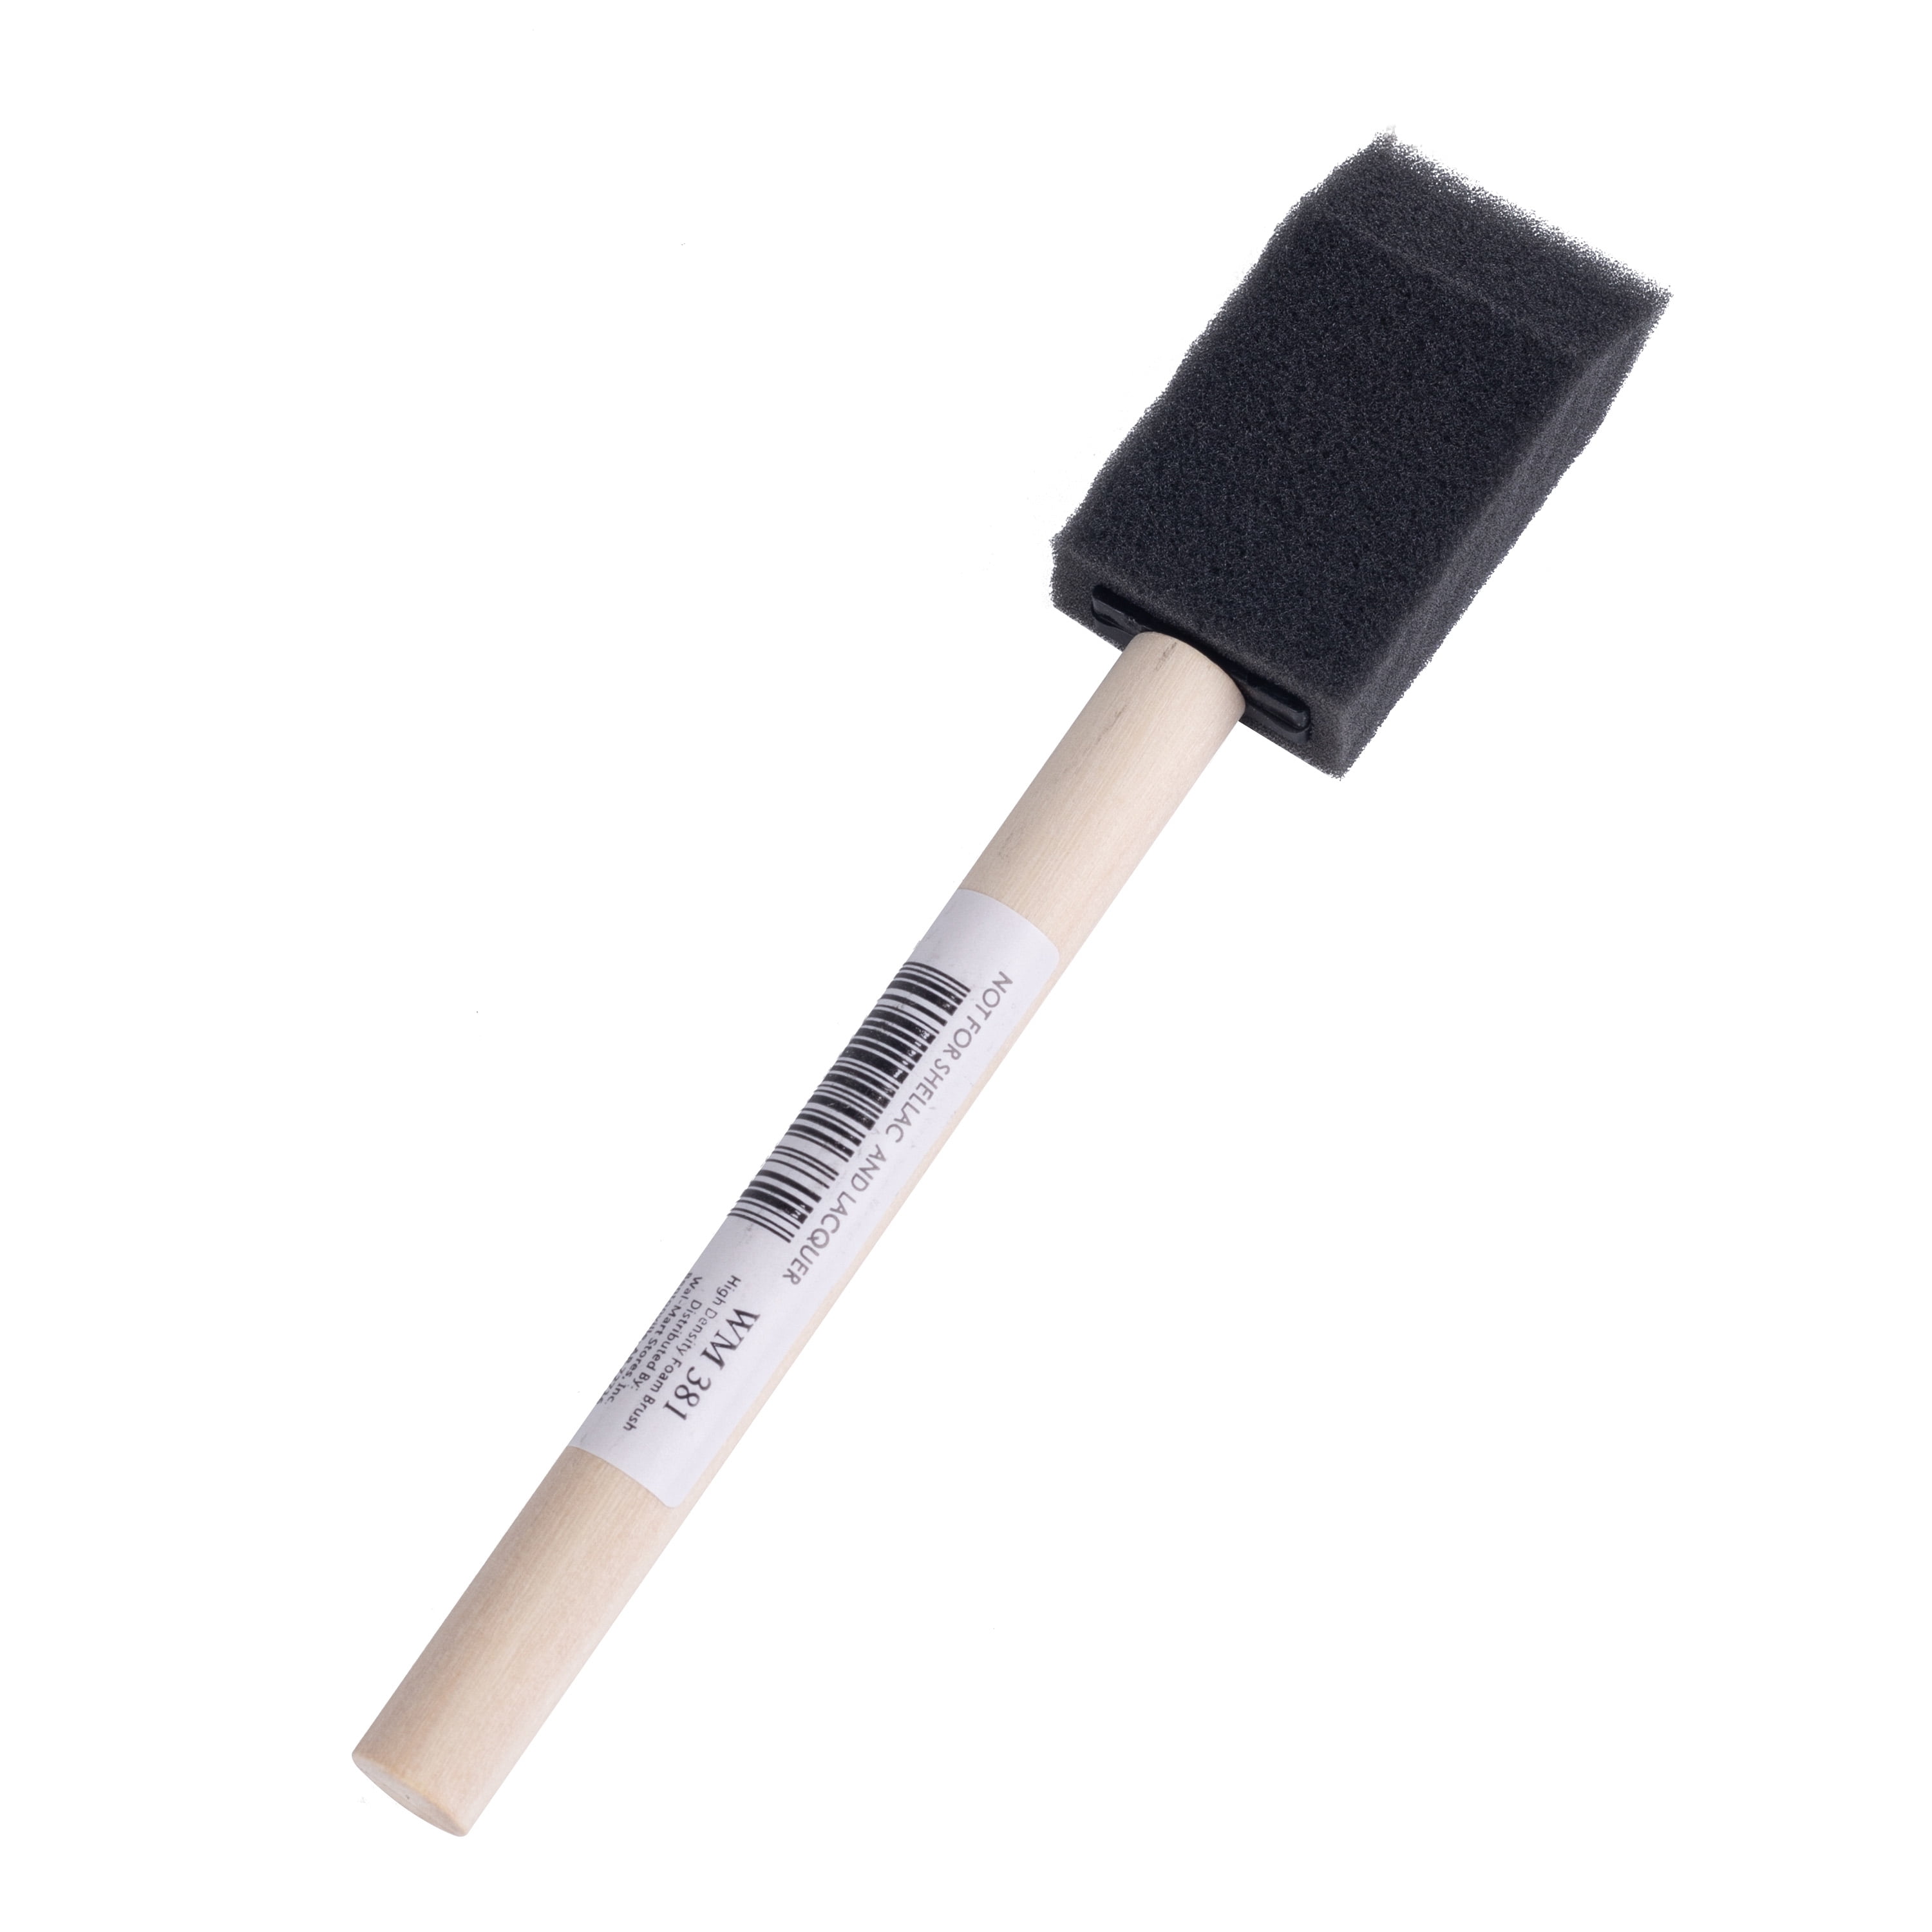 Buy Foam Brushes, 1 (Pack of 12) at S&S Worldwide